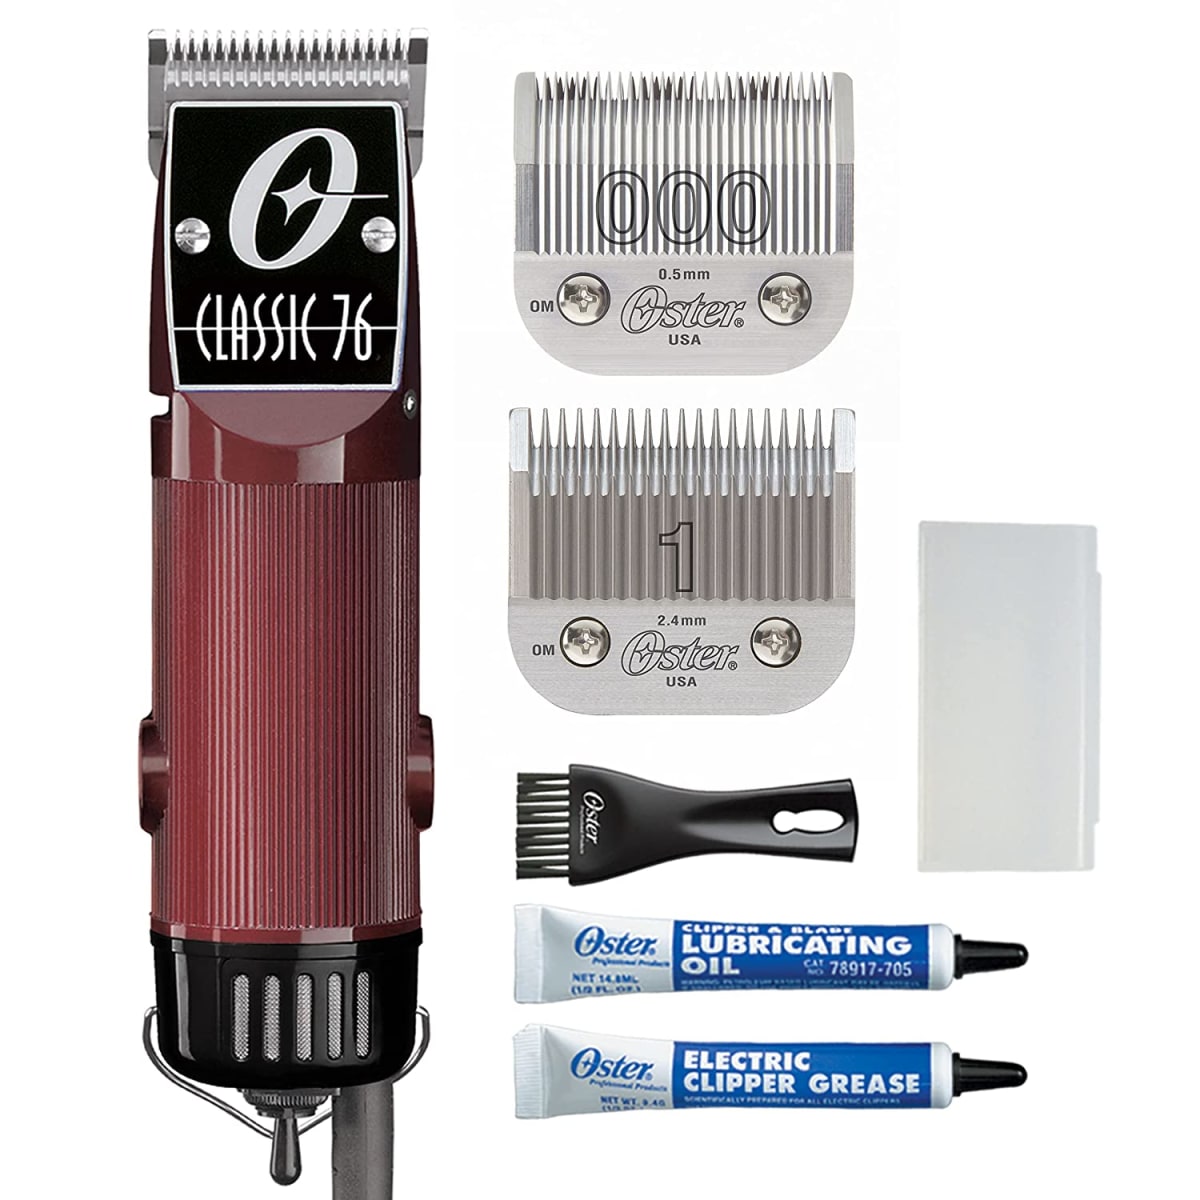 Professional Hair Clippers, Classic 76 for Barbers and Hair Cutting with Detachable Blade